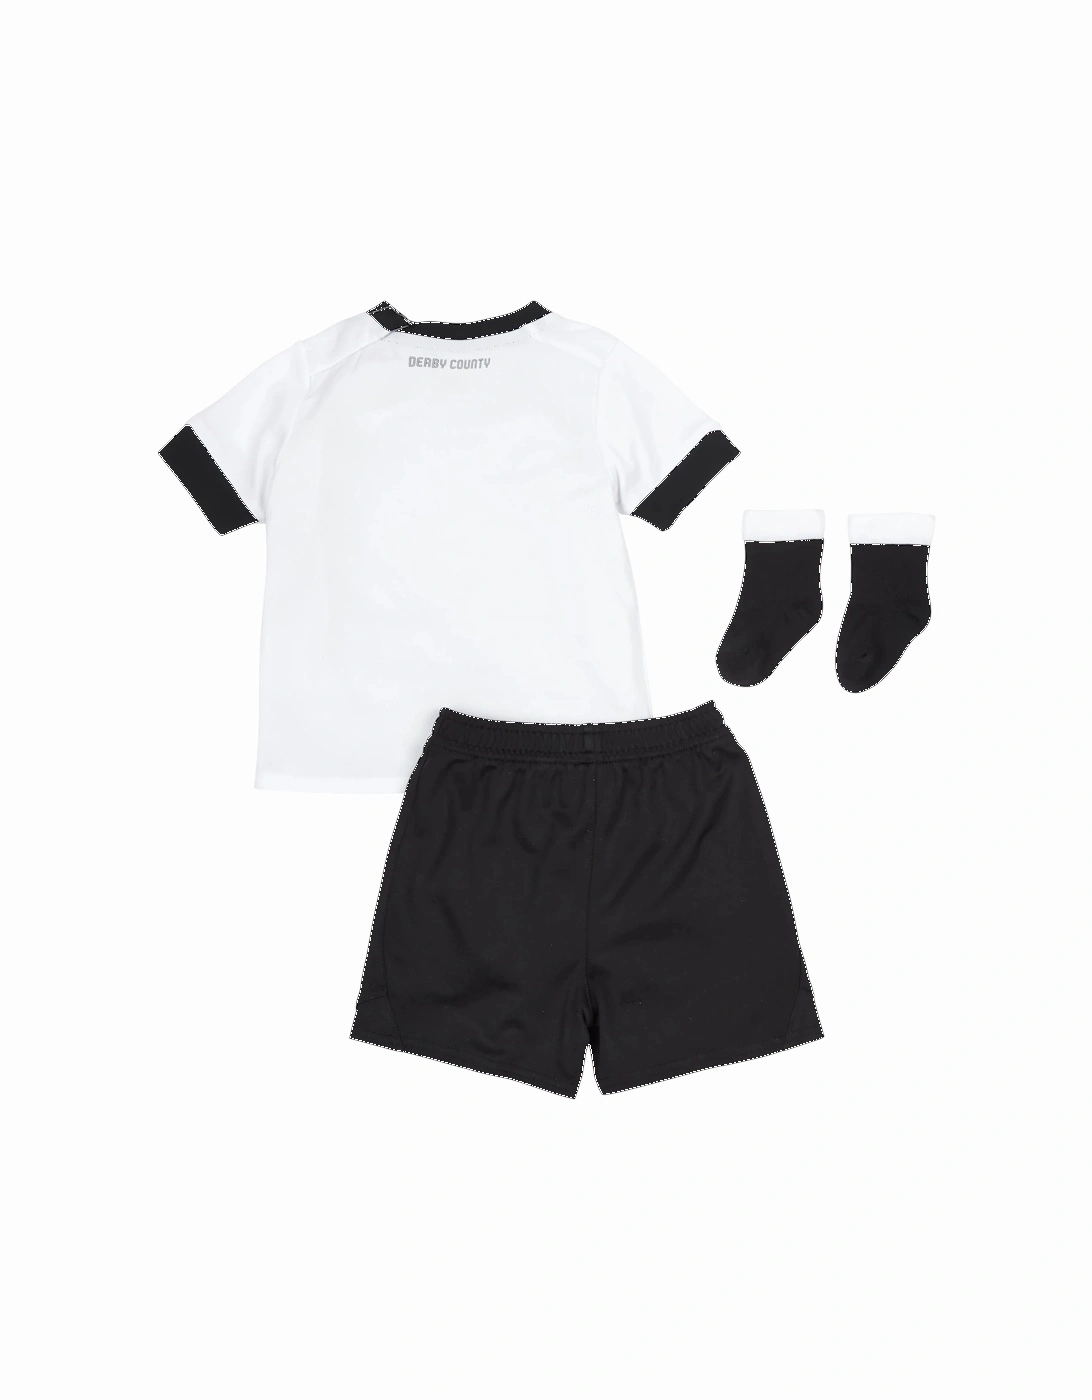 Baby 22/23 Derby County FC Home Kit